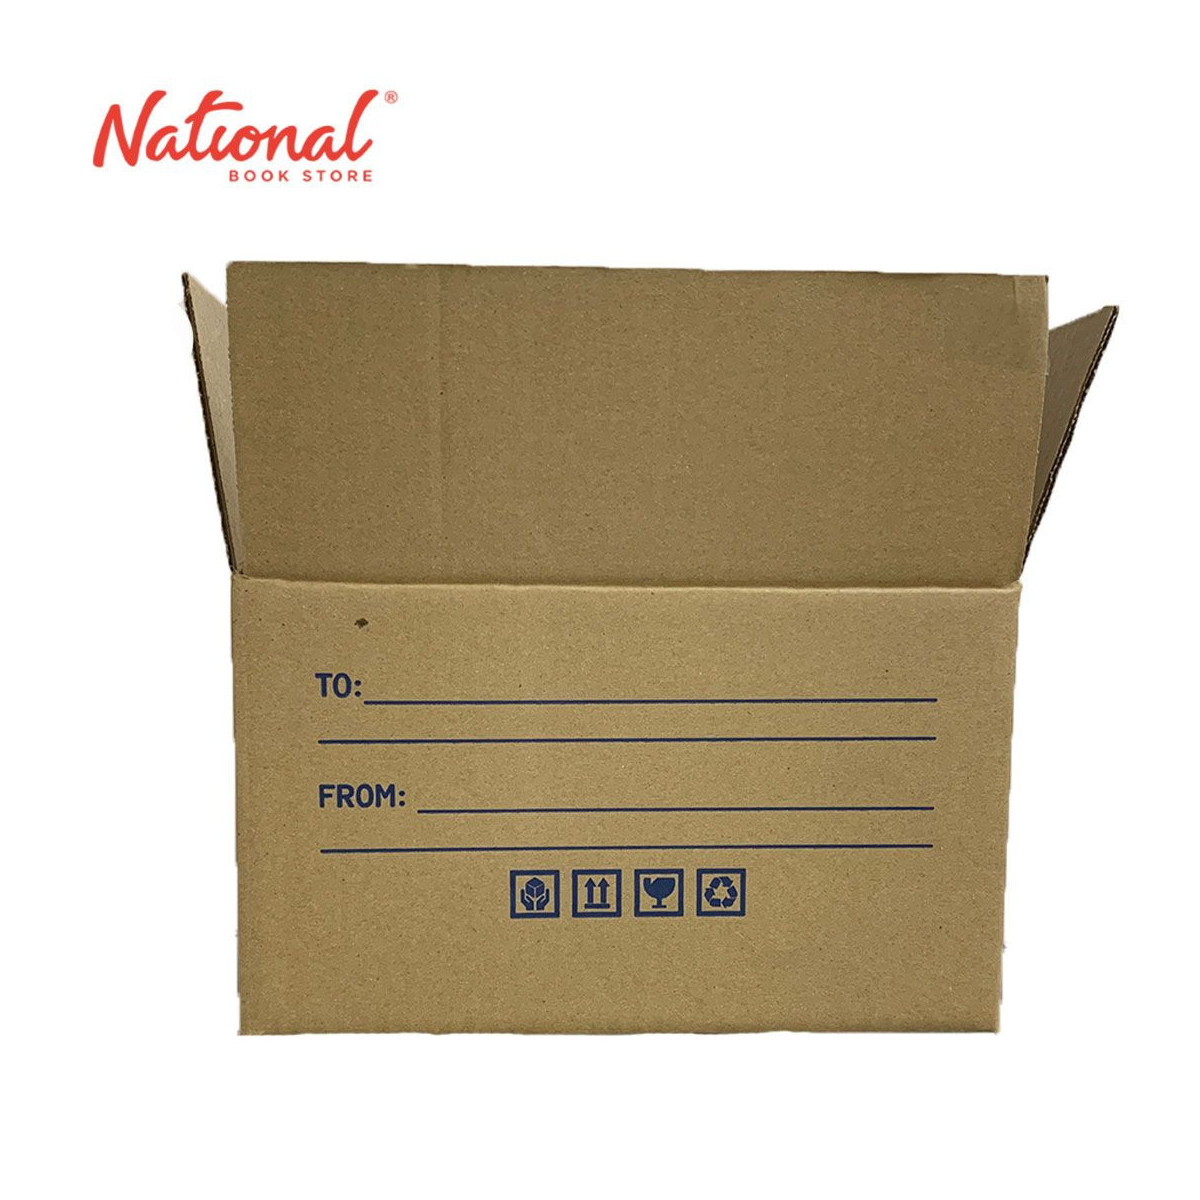 Parcel Box 225x170x130 mm Small 3 Pieces - Storage & Packaging Accessories